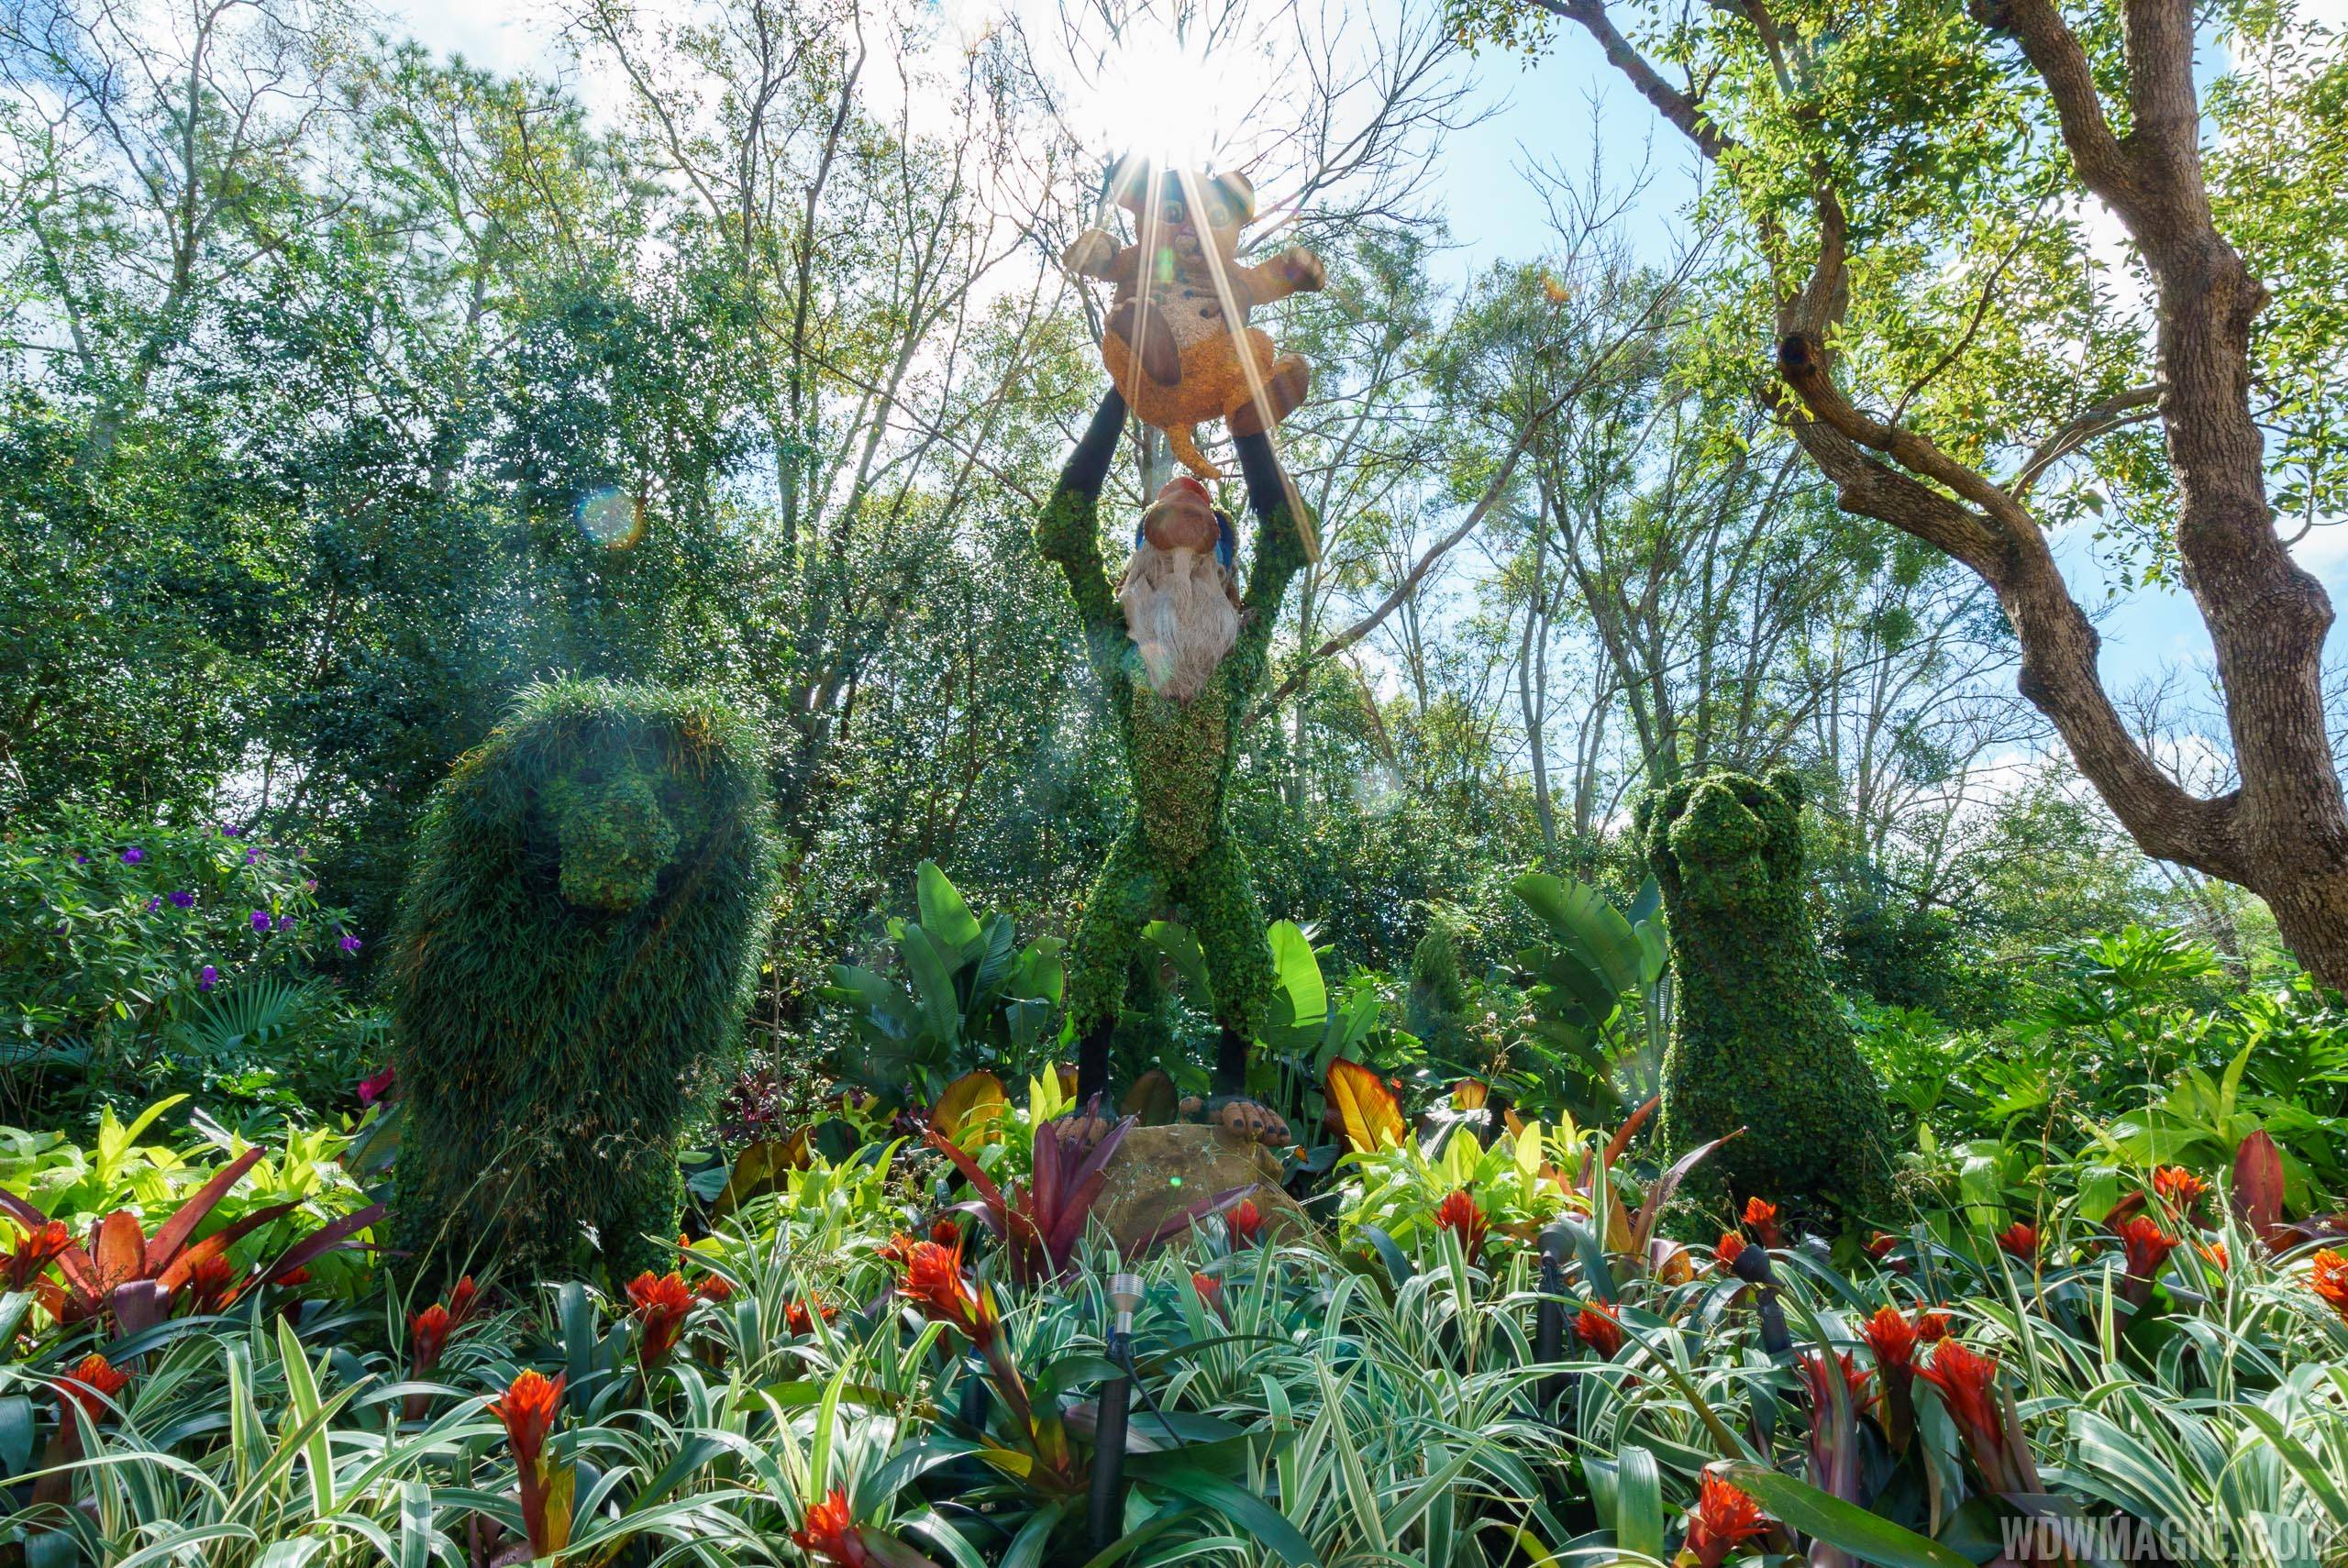 2017 Flower and Garden Festival - The Lion King topiaries at the Outpost